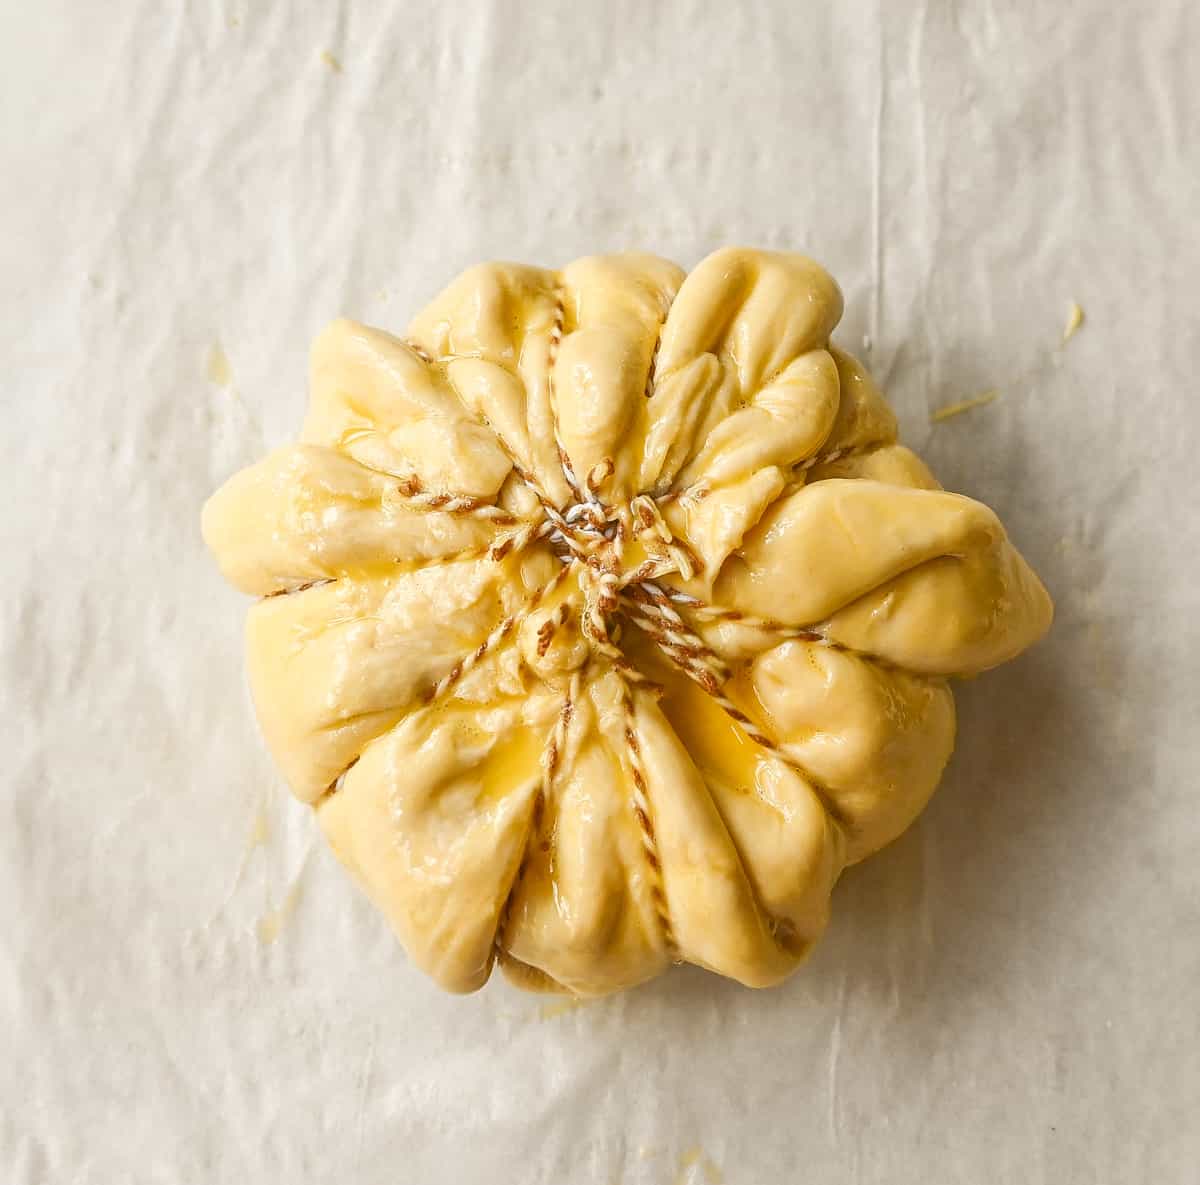 Pumpkin Shaped Baked Brie Puff Pastry wrapped in bakers twine